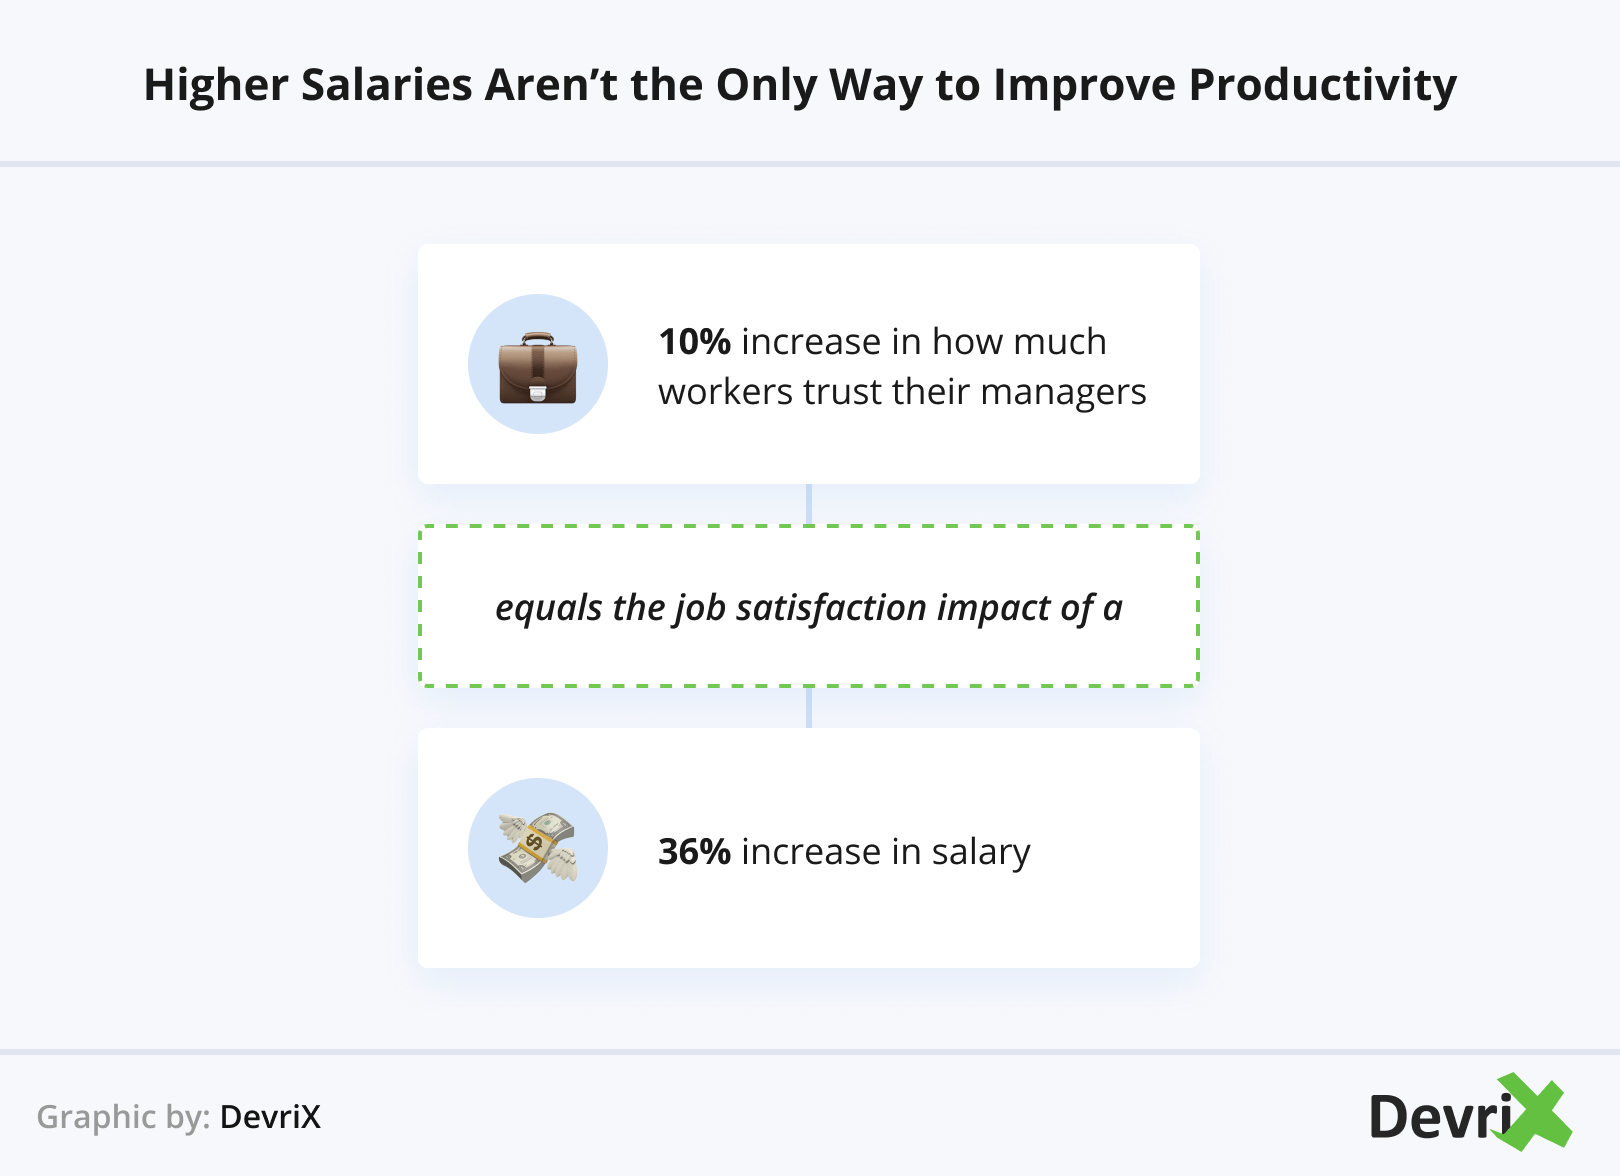 Higher salaries aren’t the only way to improve productivity